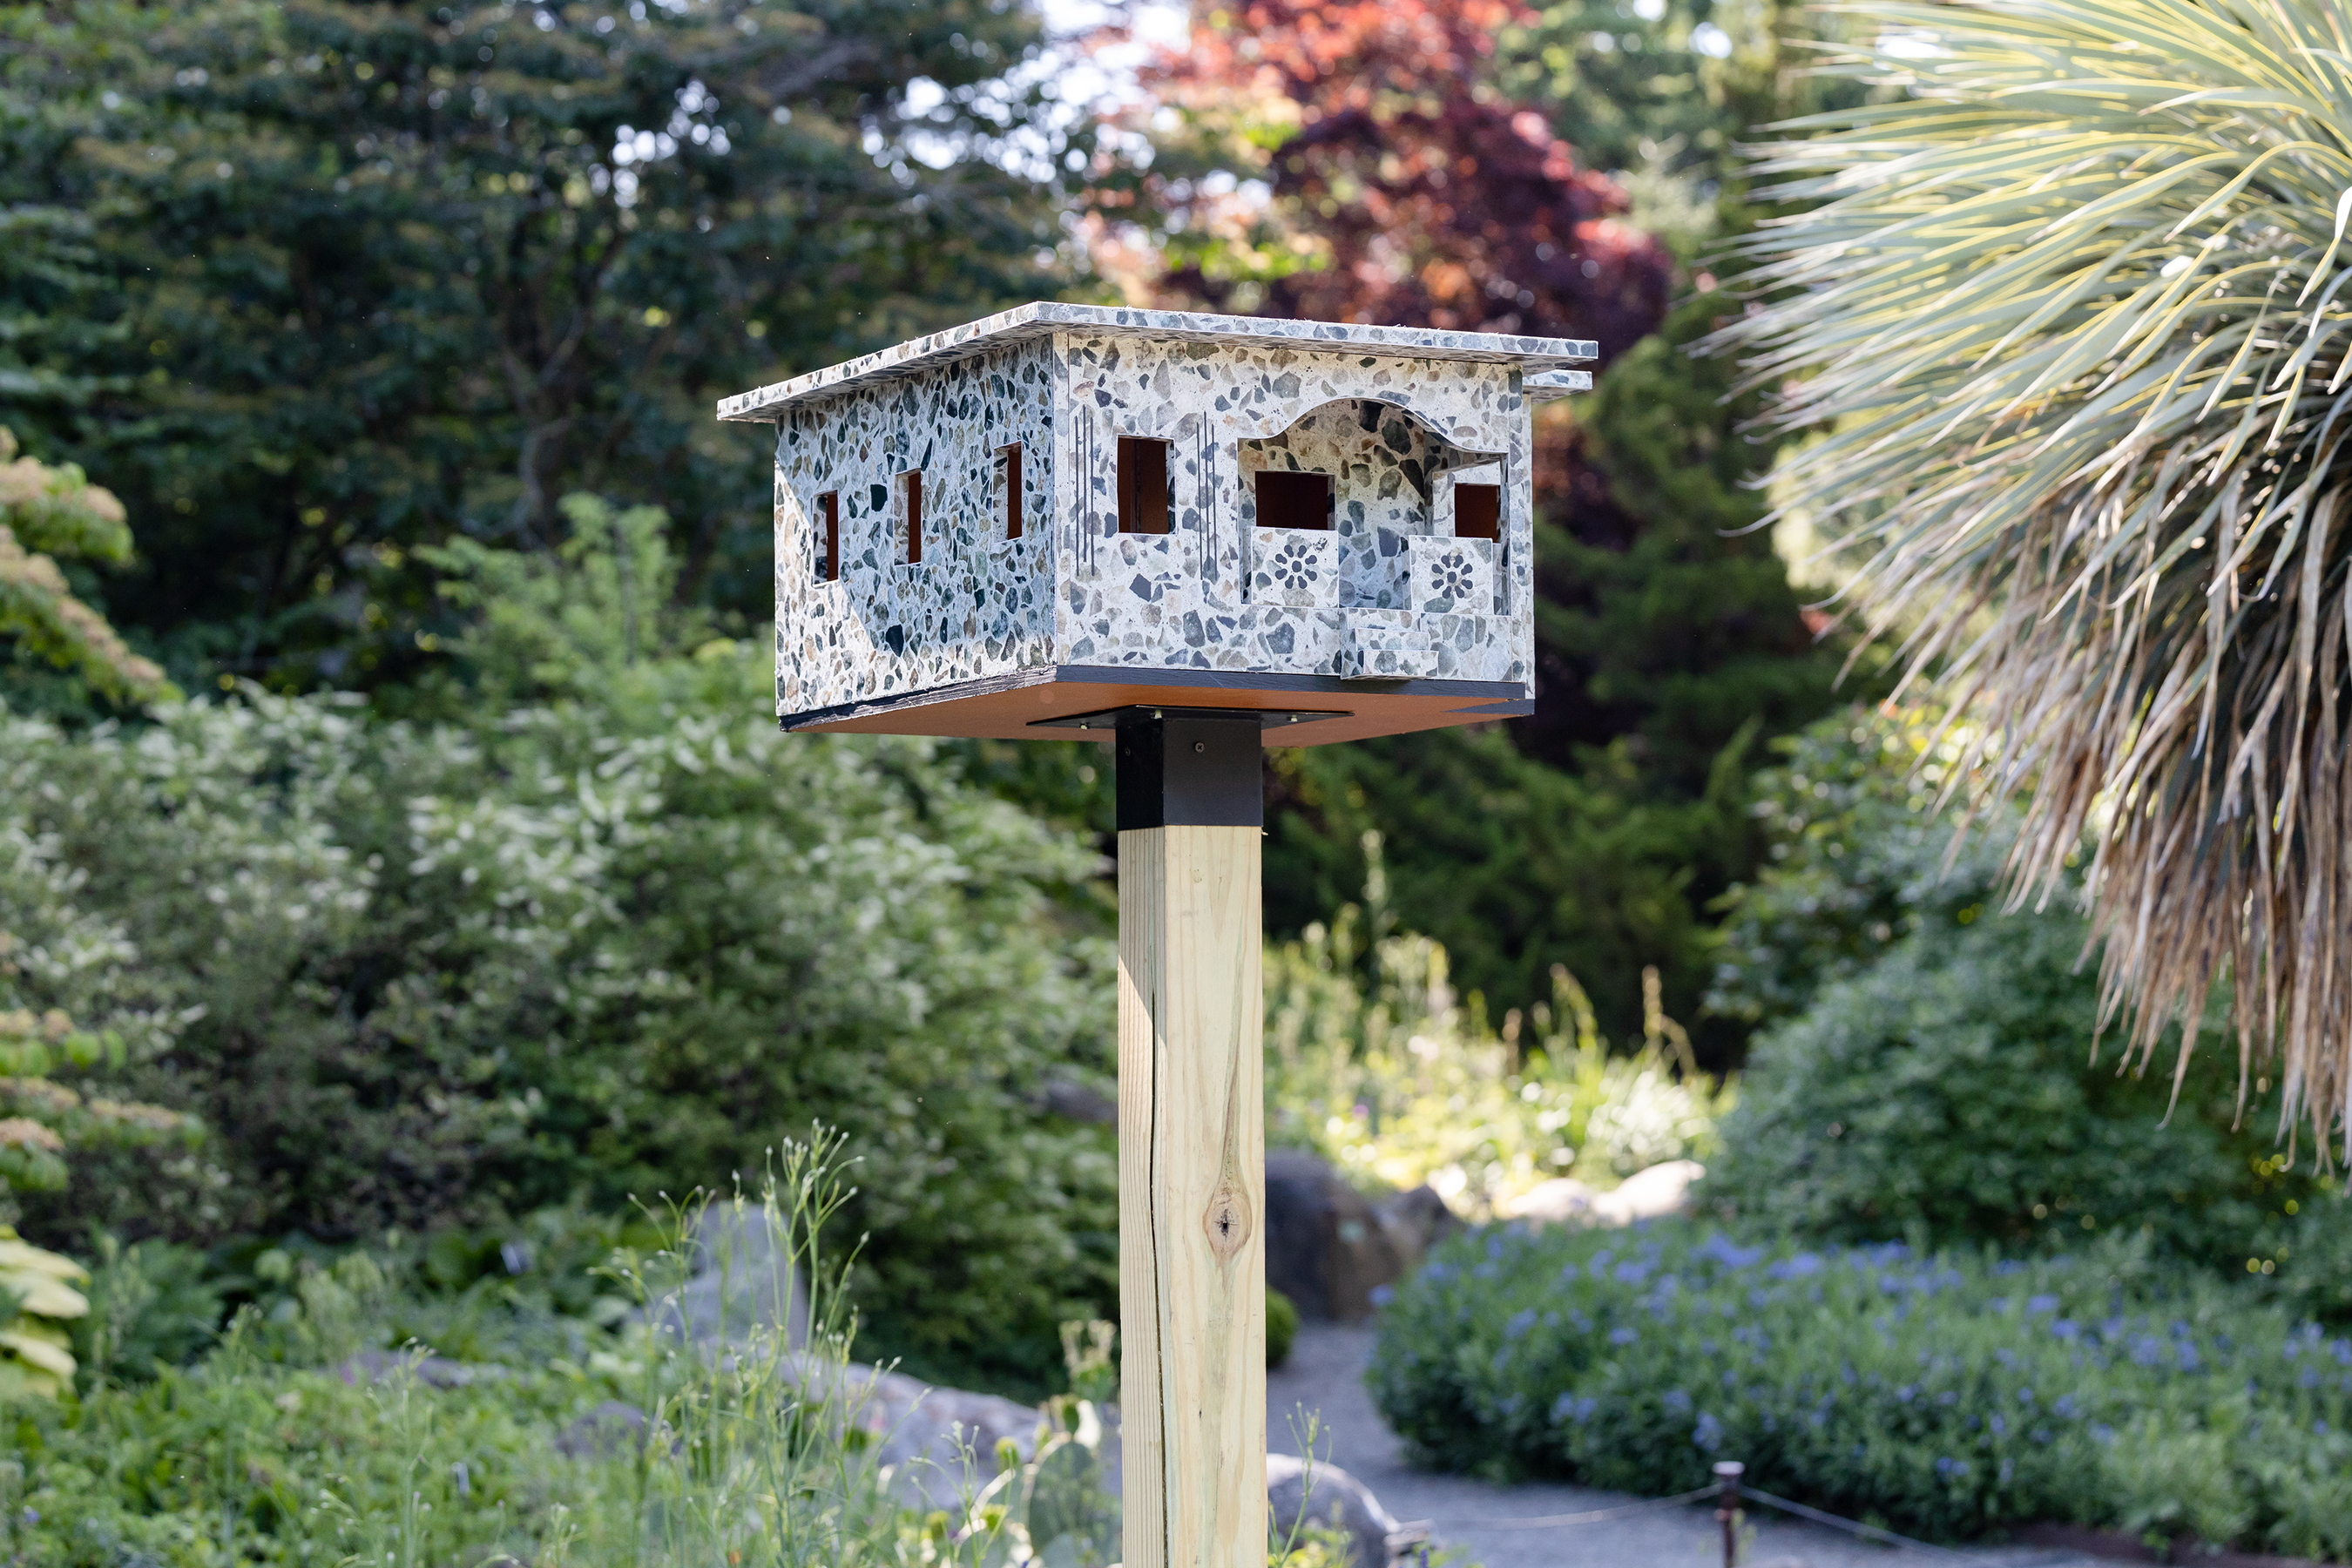 A garden-wide exhibition of site-specific birdhouses called For the Birds